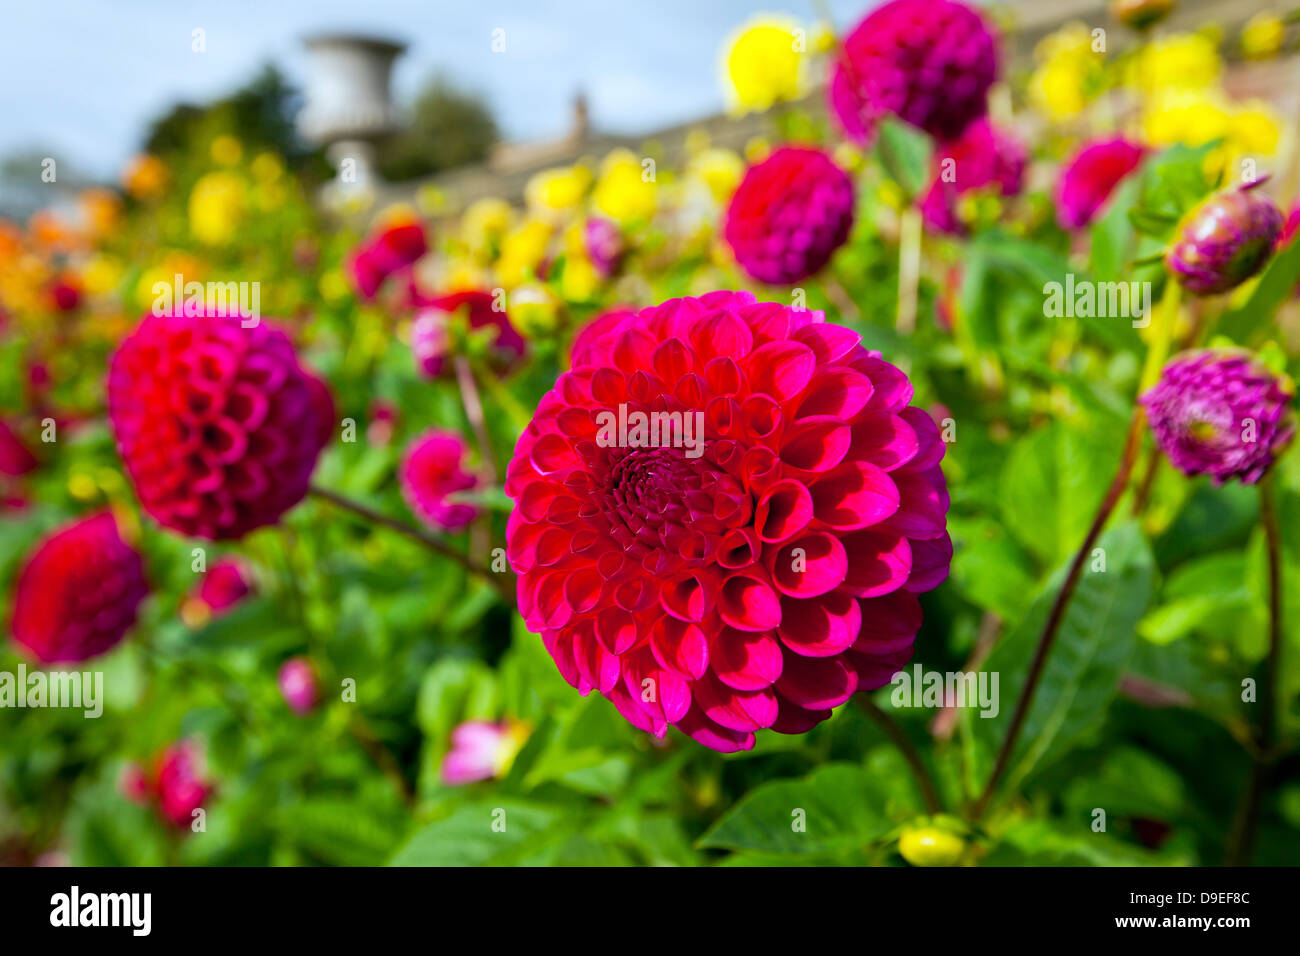 Red and yellow dahlias in a garden. Stock Photo